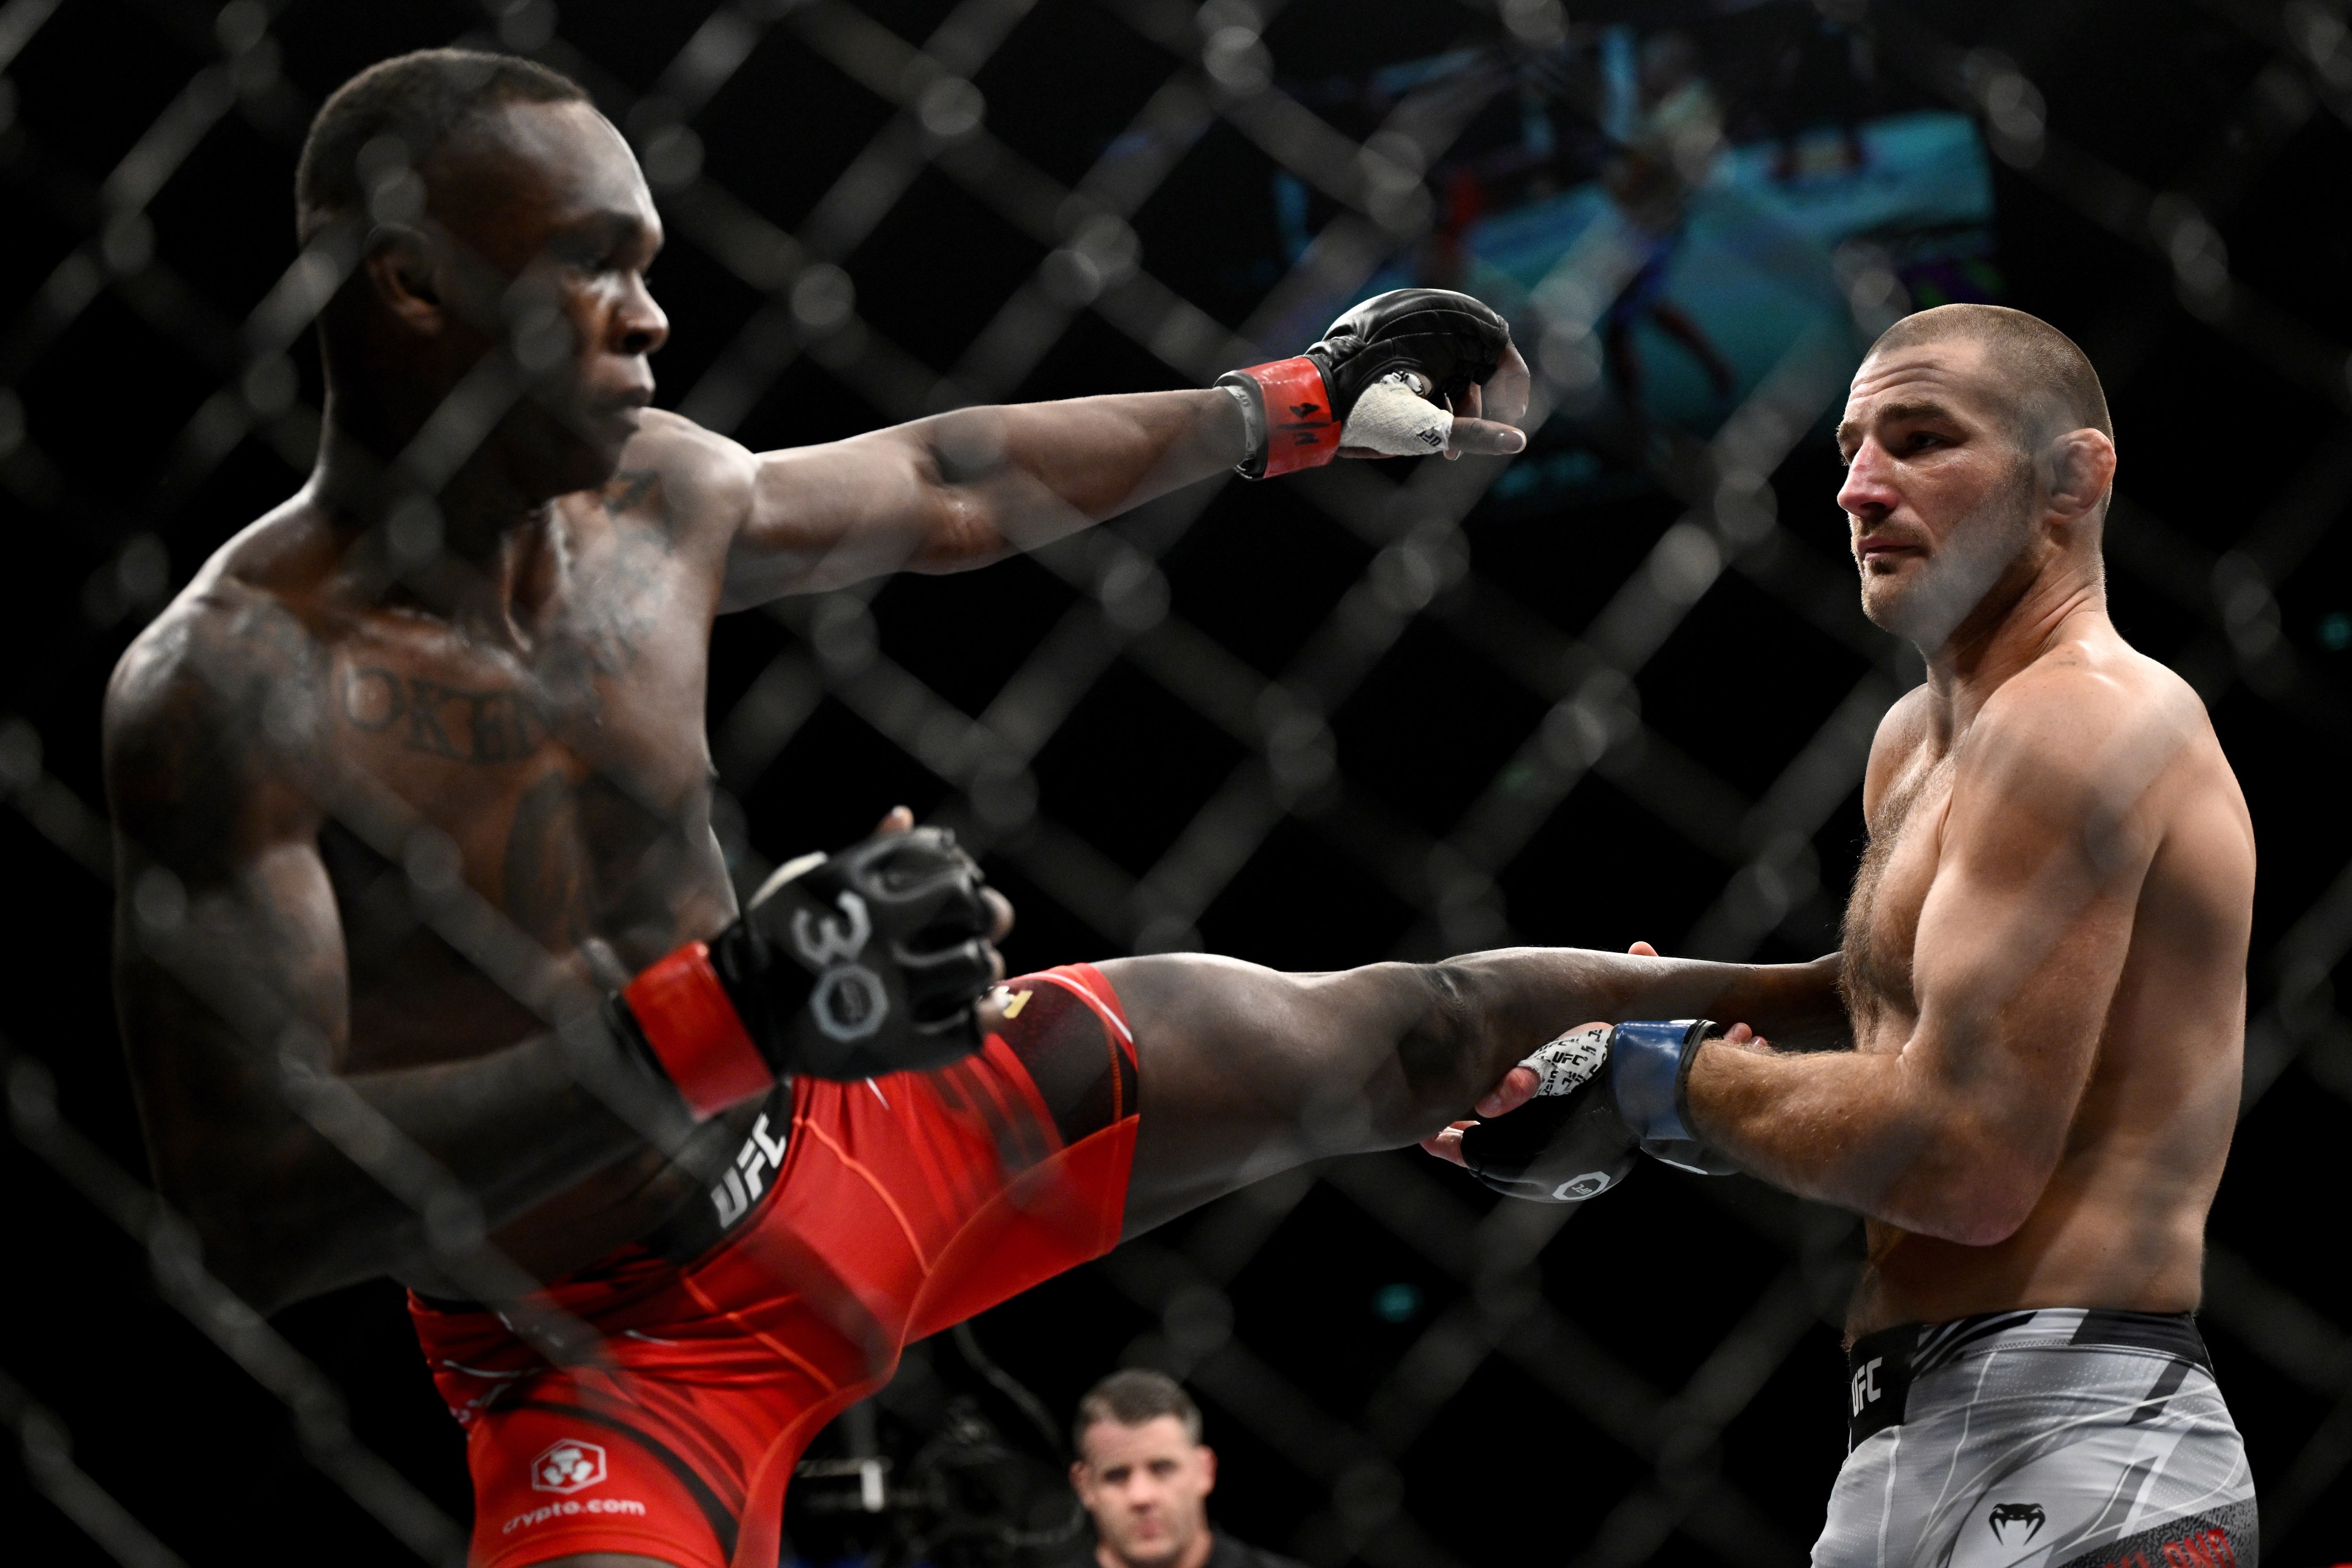 Israel Adesanya and Sean Strickland in action during the UFC 293 main event in Sydney. Photo: EPA-EFE